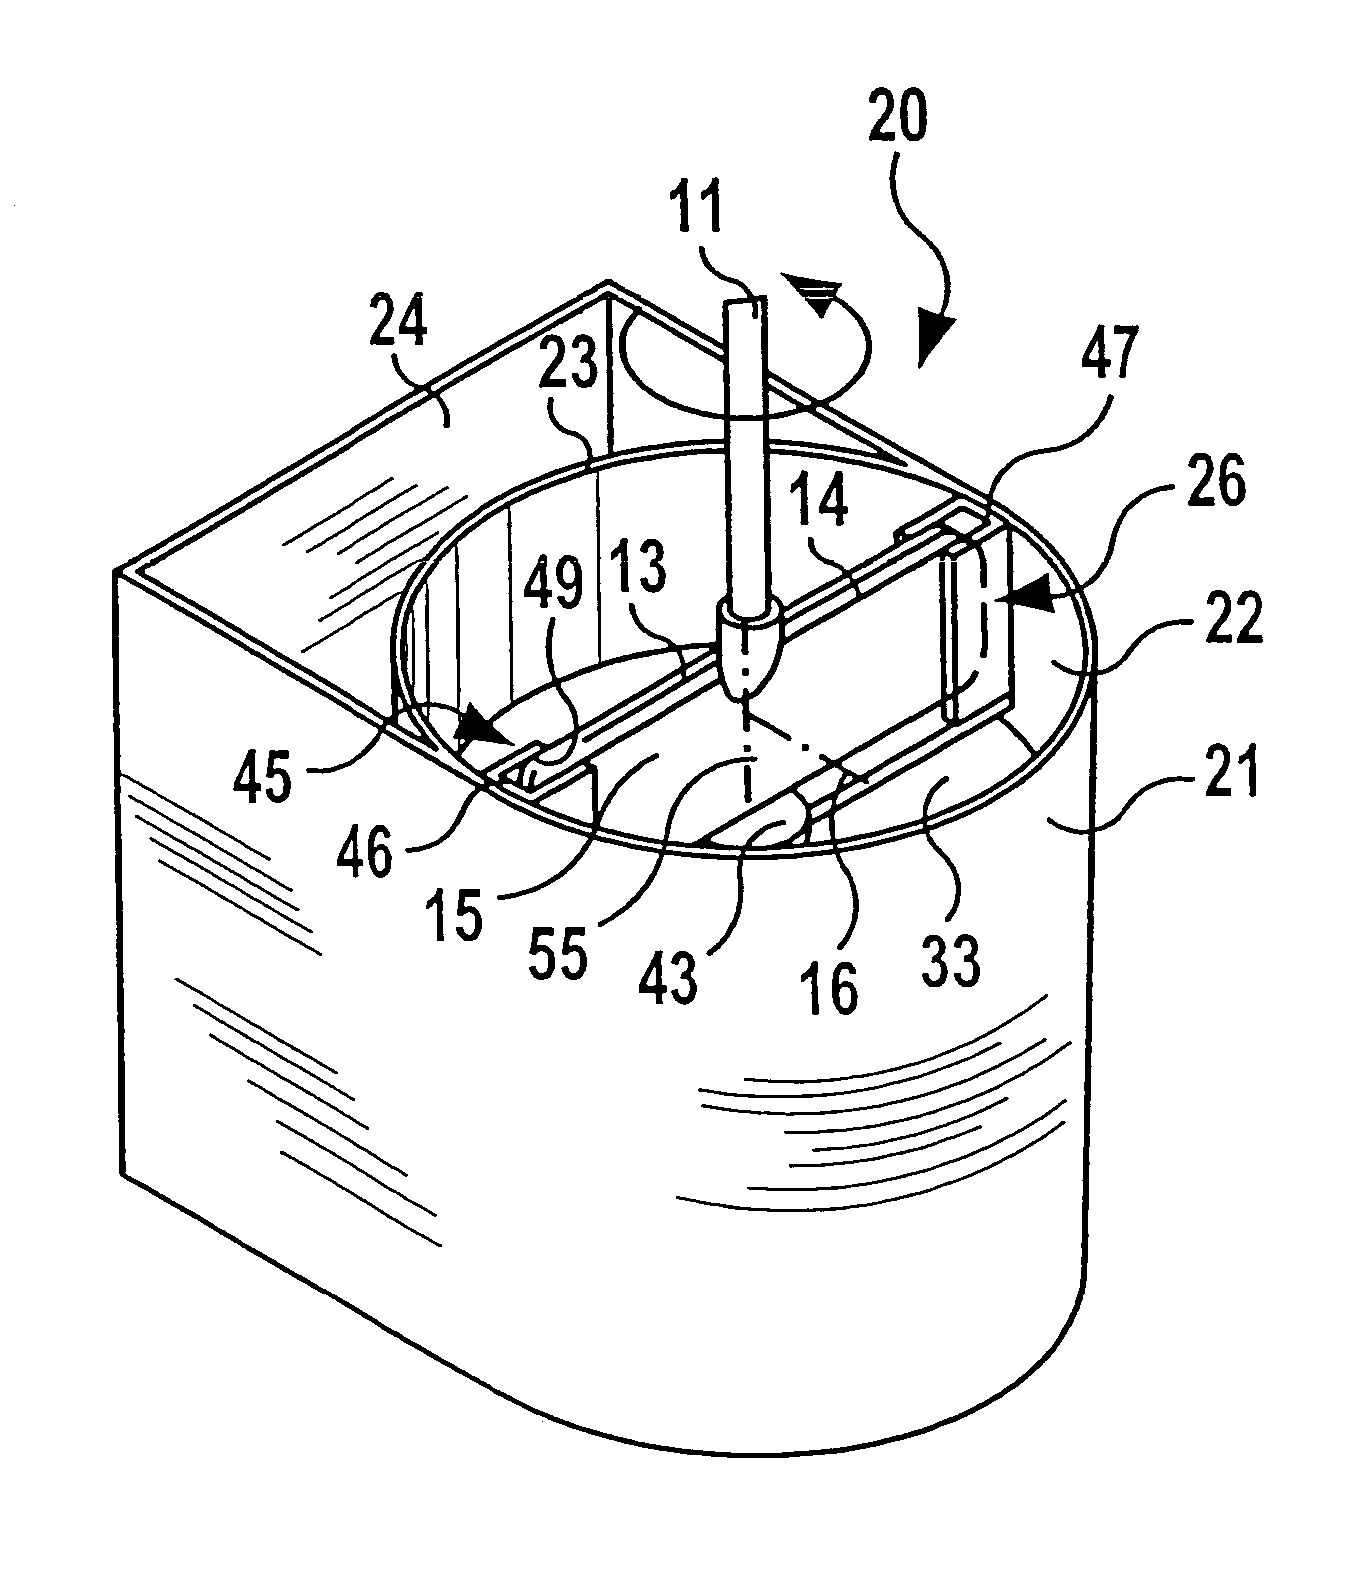 Device for expelling liquid from a wiping element